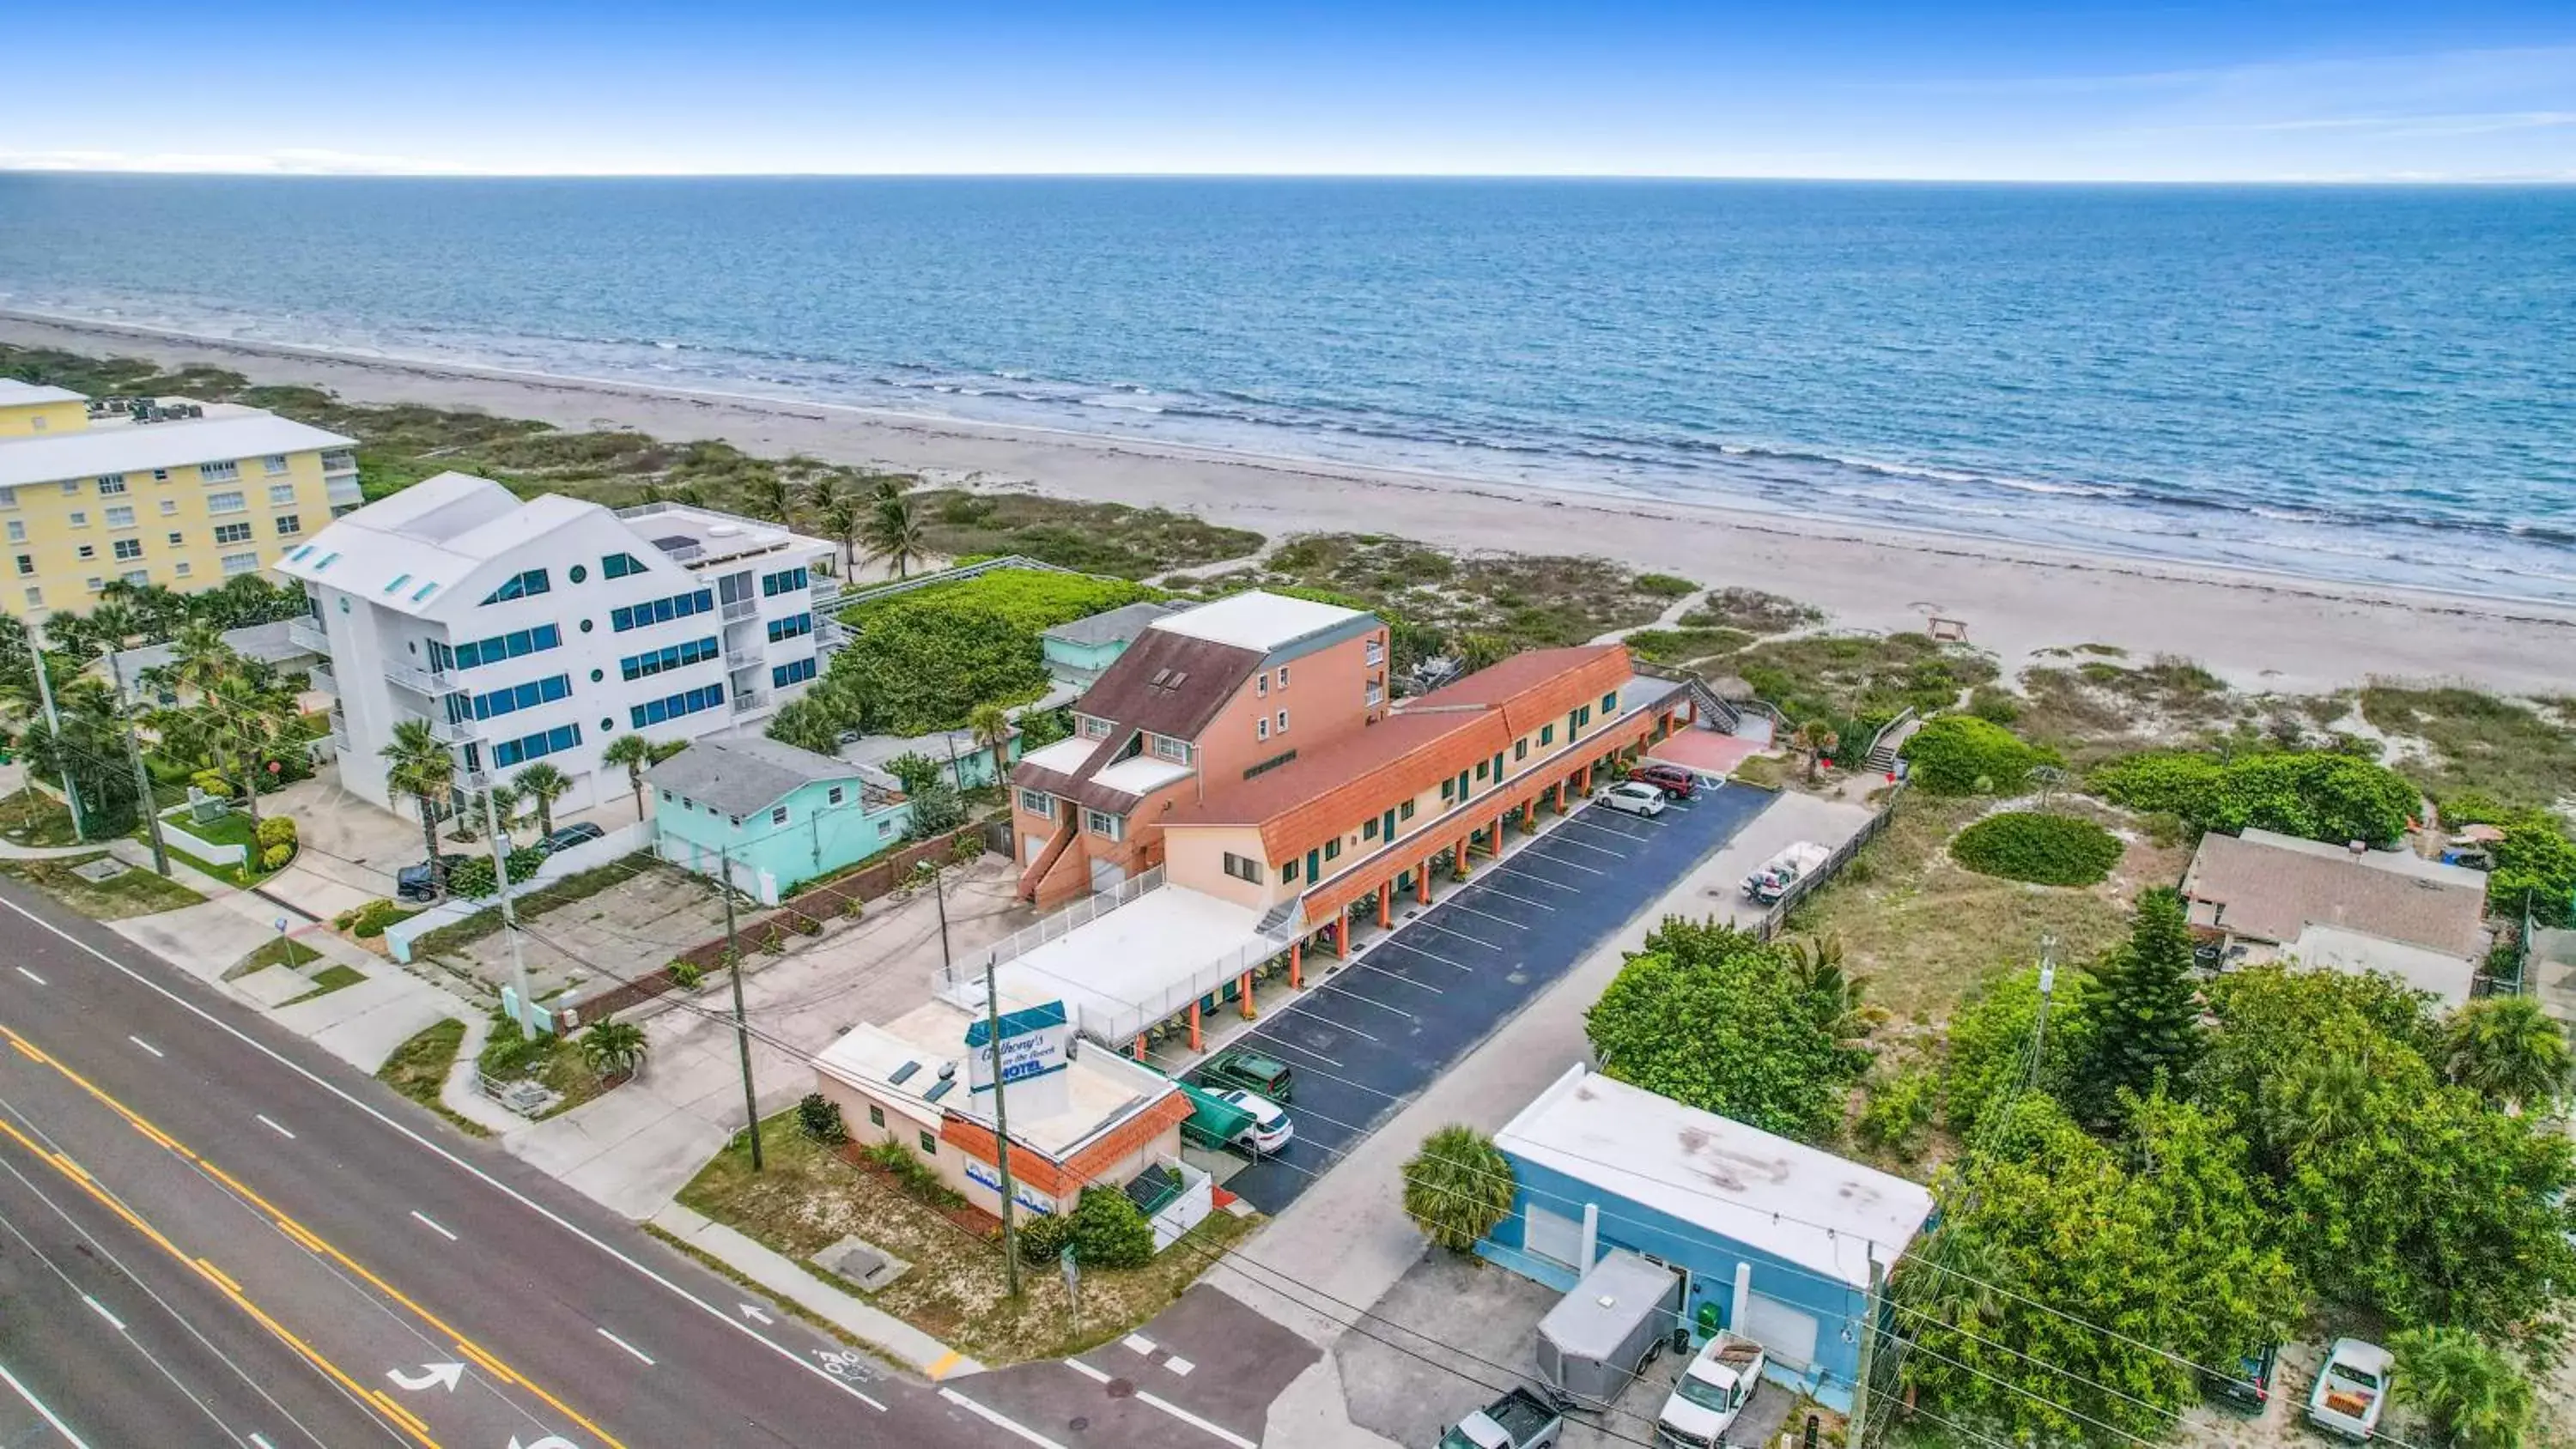 Property building, Bird's-eye View in Anthony's on the Beach